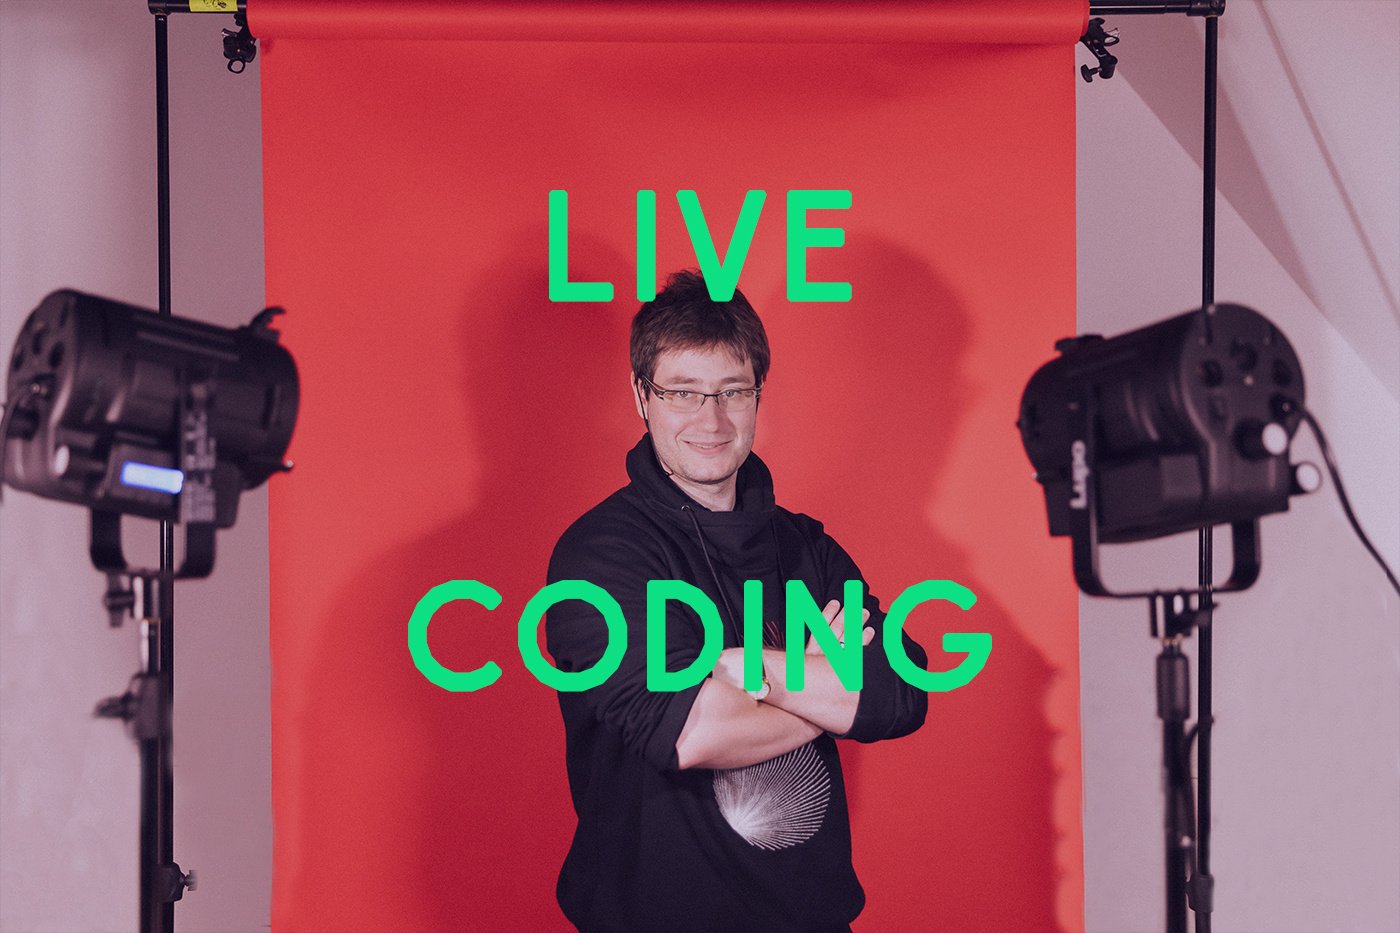 Live Coding #2: Building Powerful Games with DOTS by Unity